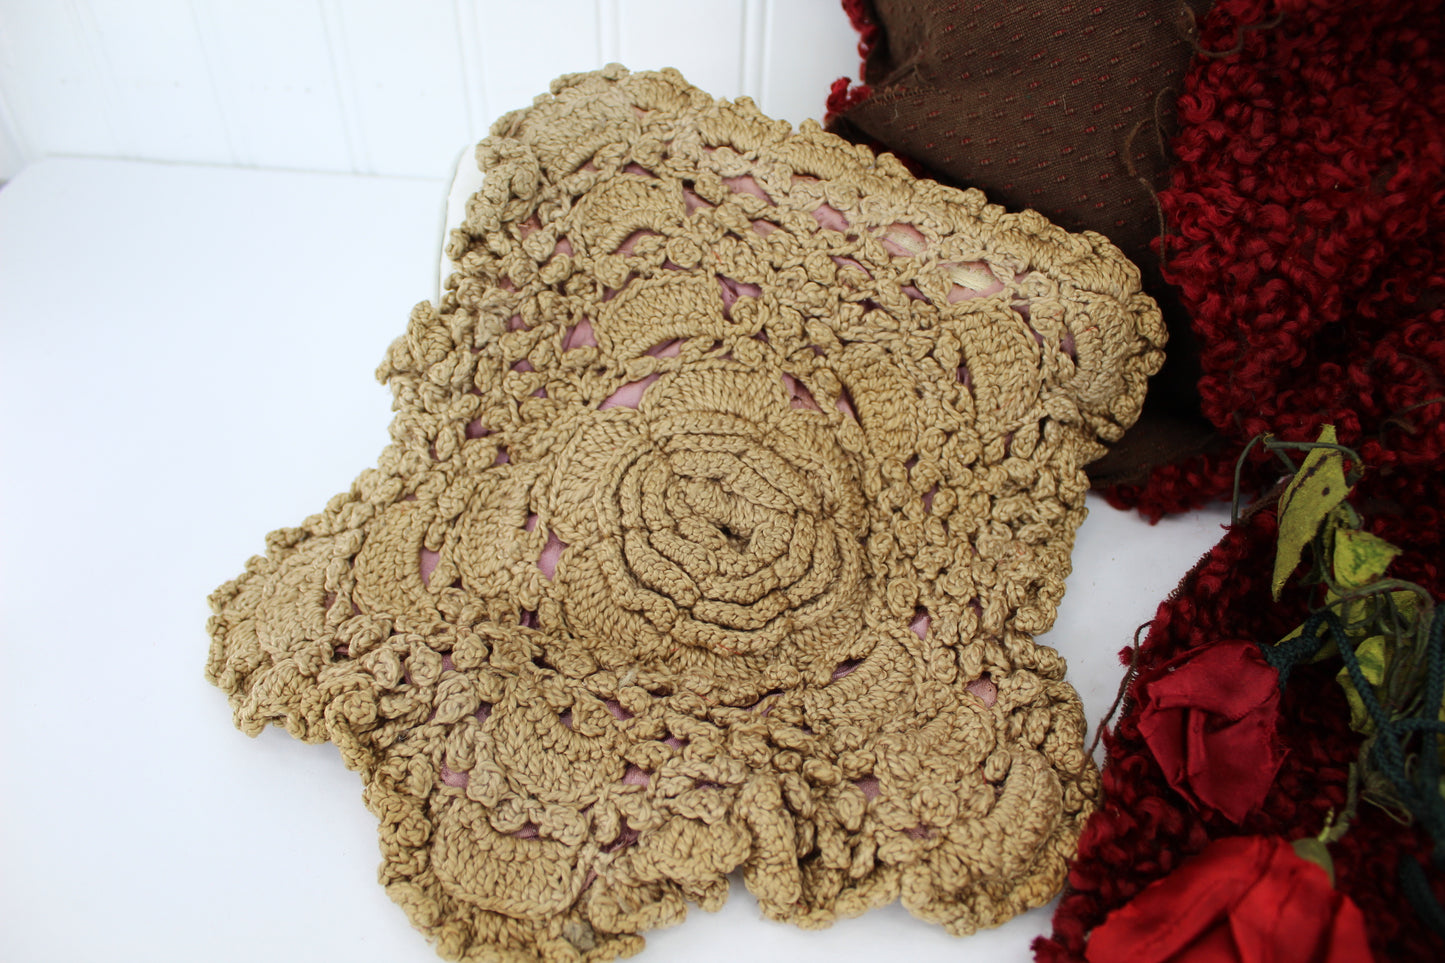 Victorian Antique Craft 2 Items - Red Curly Fabric & Unfinished Crochet Purse victoriana sewing arts